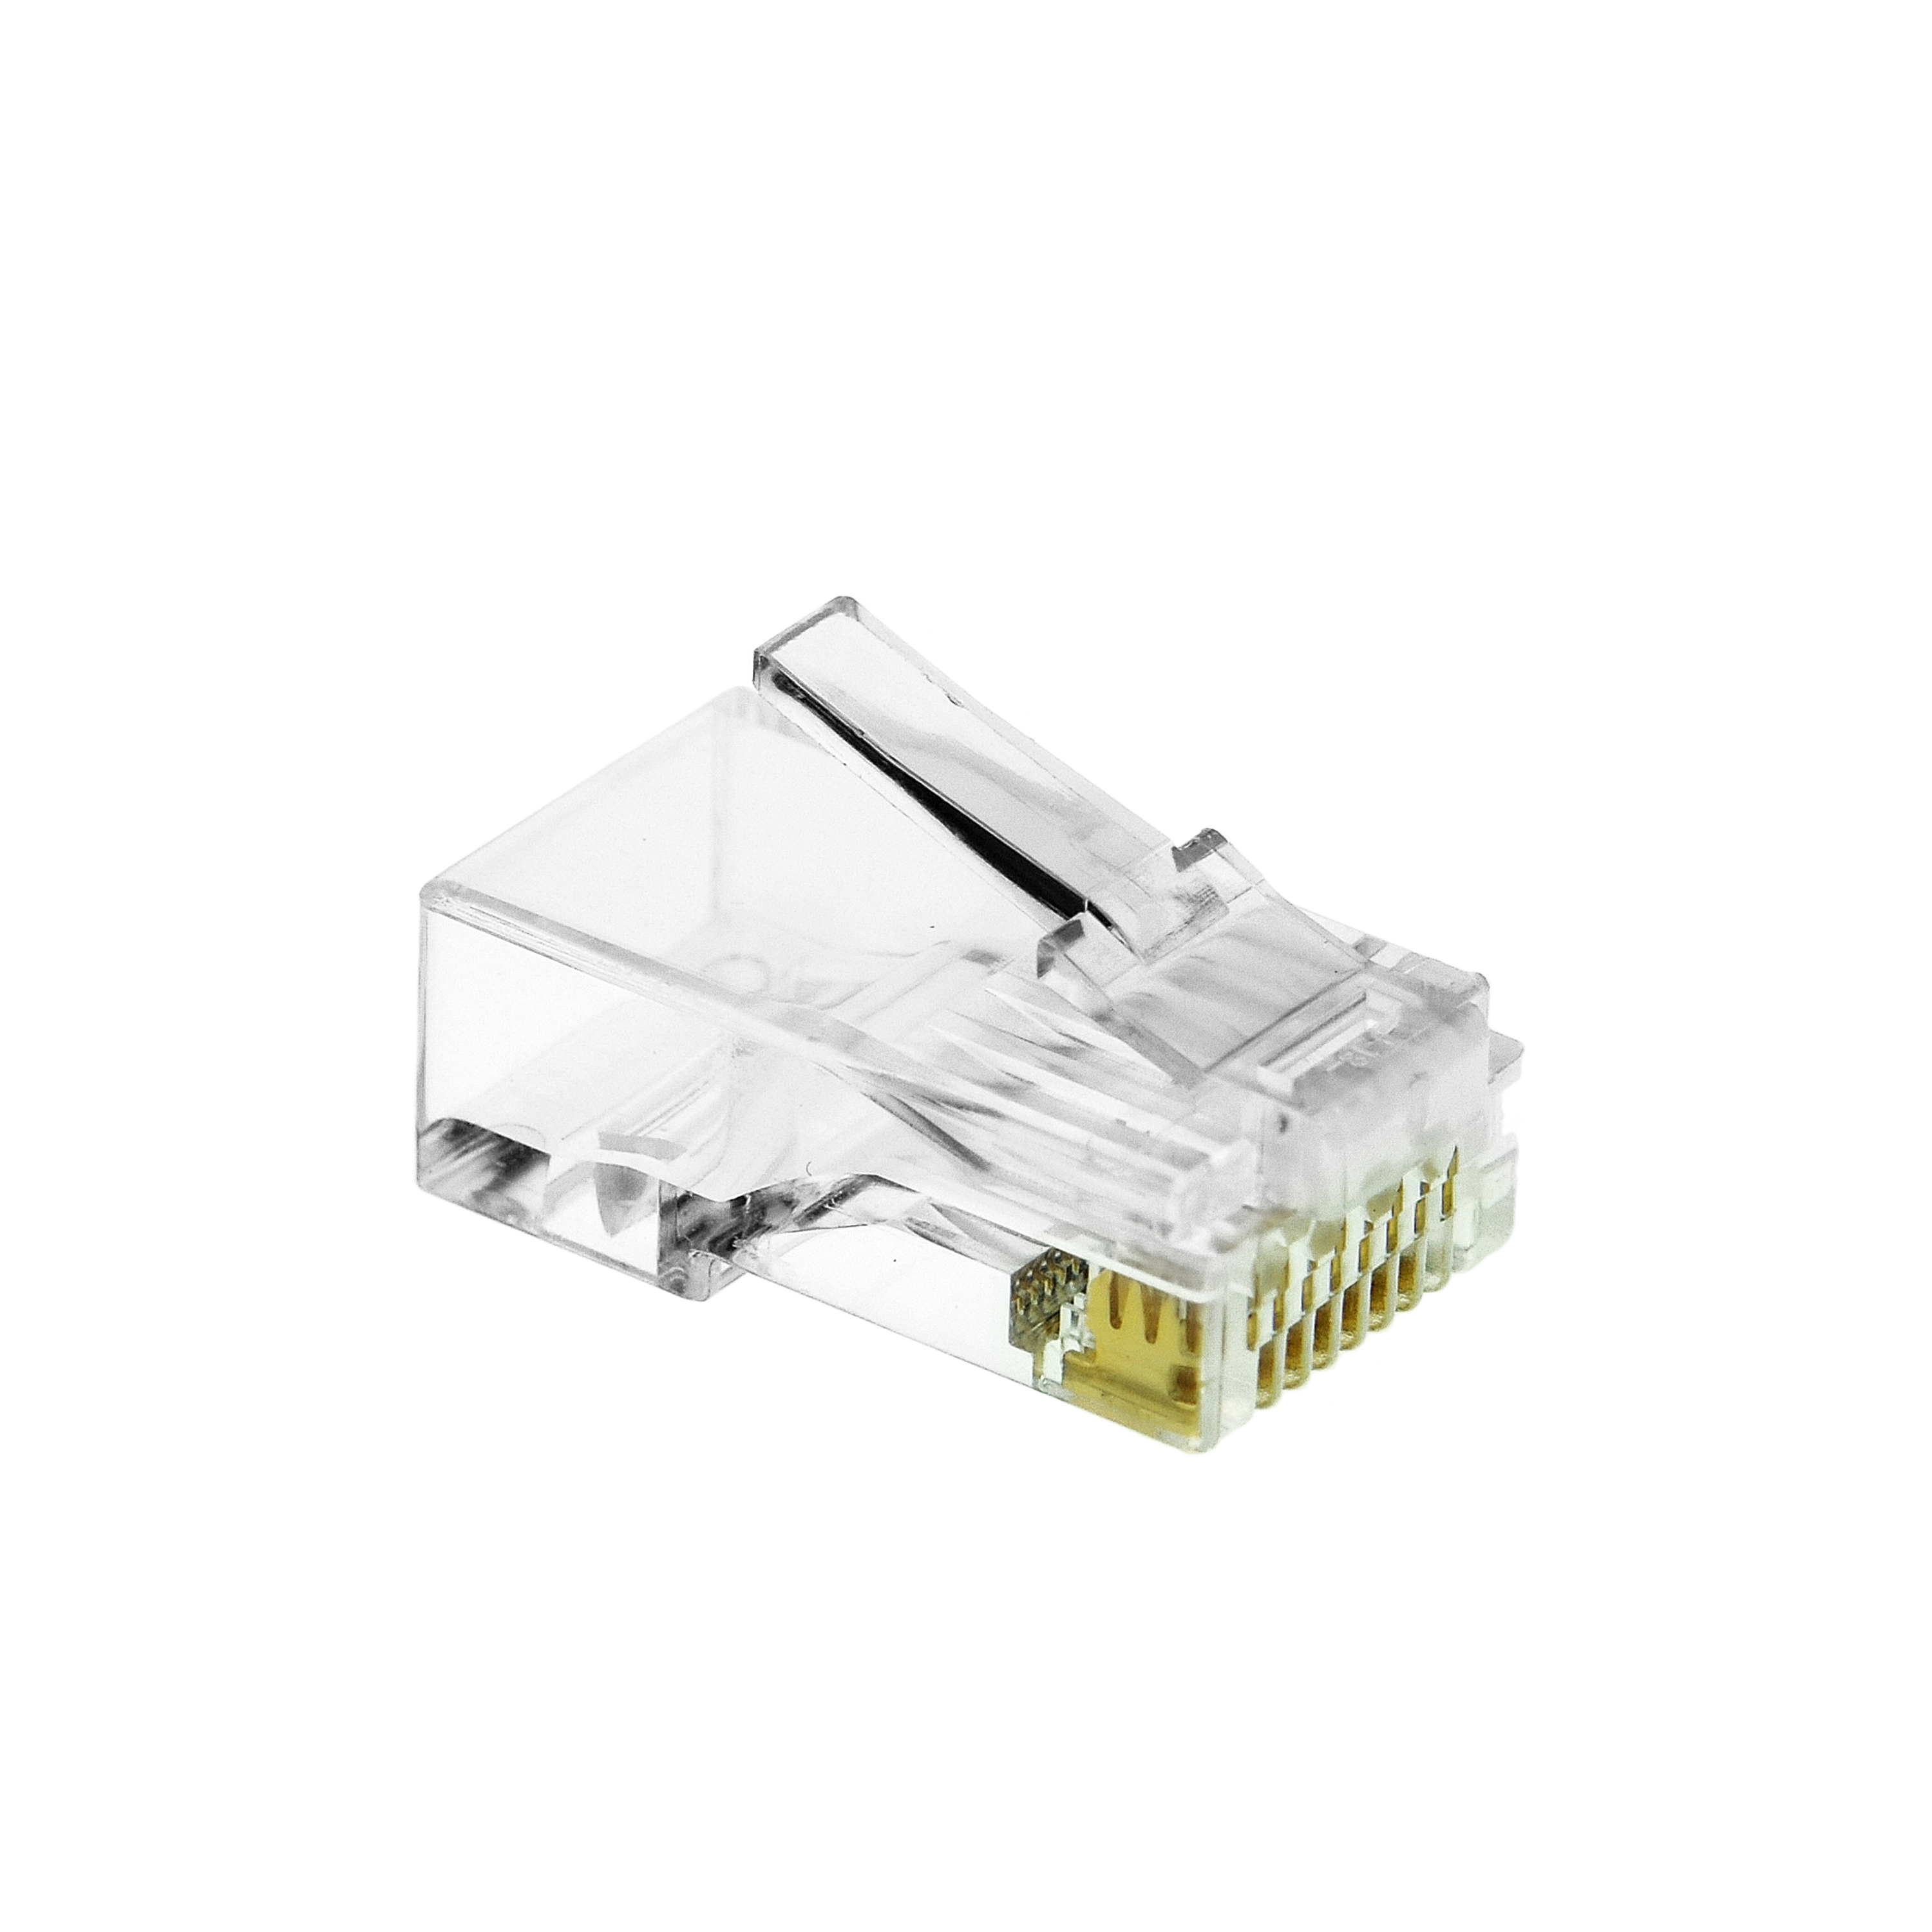 Tyco Electronics rj45. Clear connection